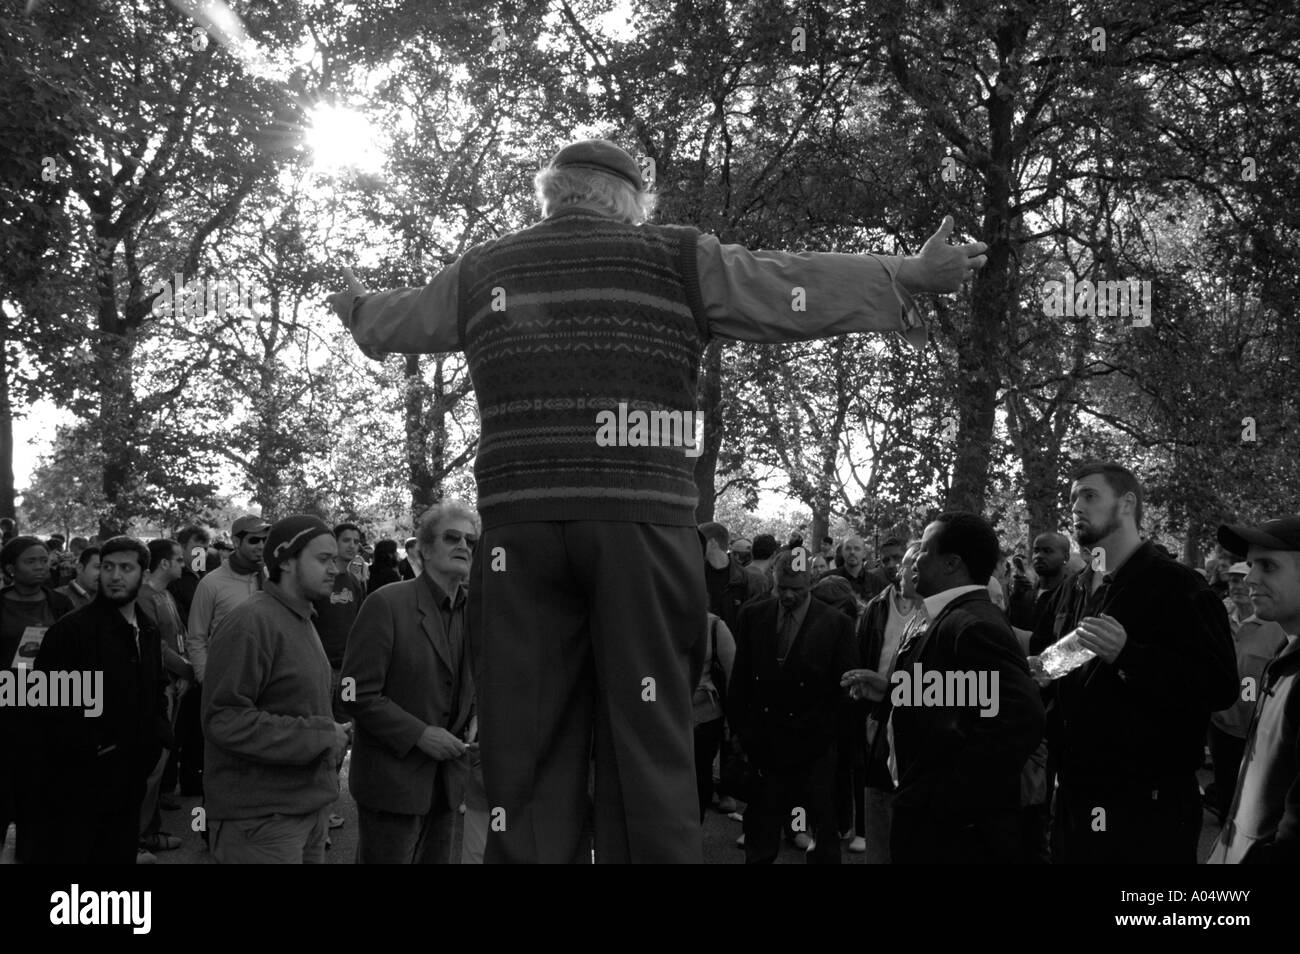 Rear view of Evangelical Christian preacher with arms outstretched addressing a crowd at Speaker's Corner, London, England Stock Photo